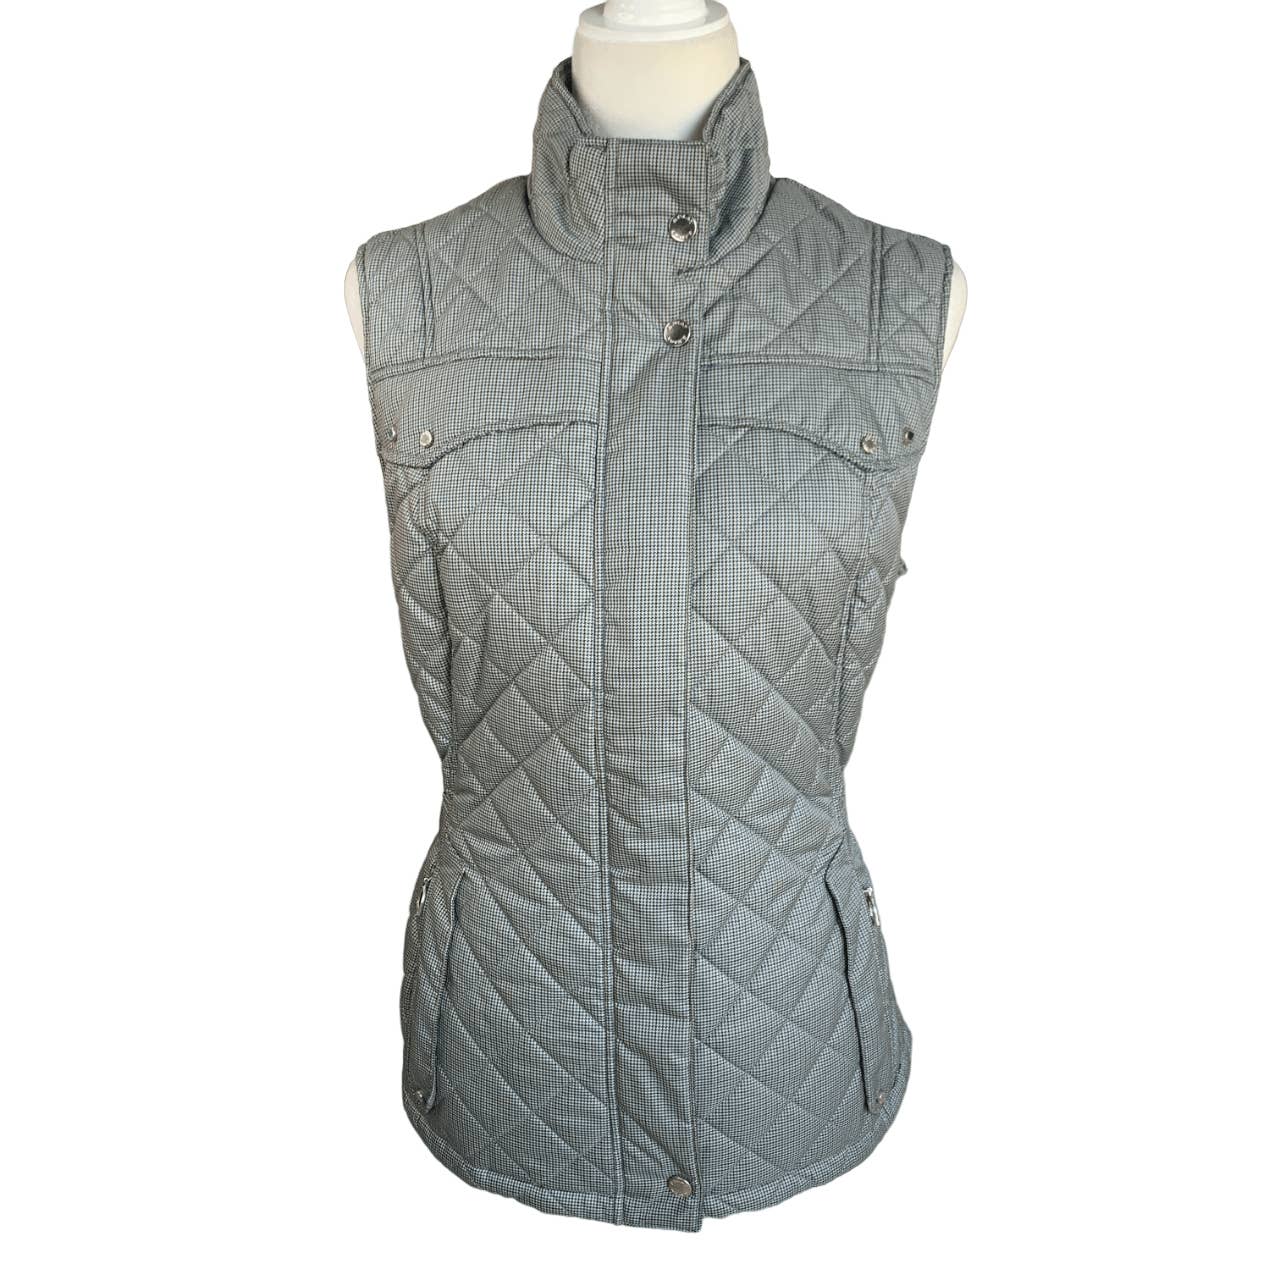 Ariat Quilted Riding Vest in Grey - Woman's X-Large